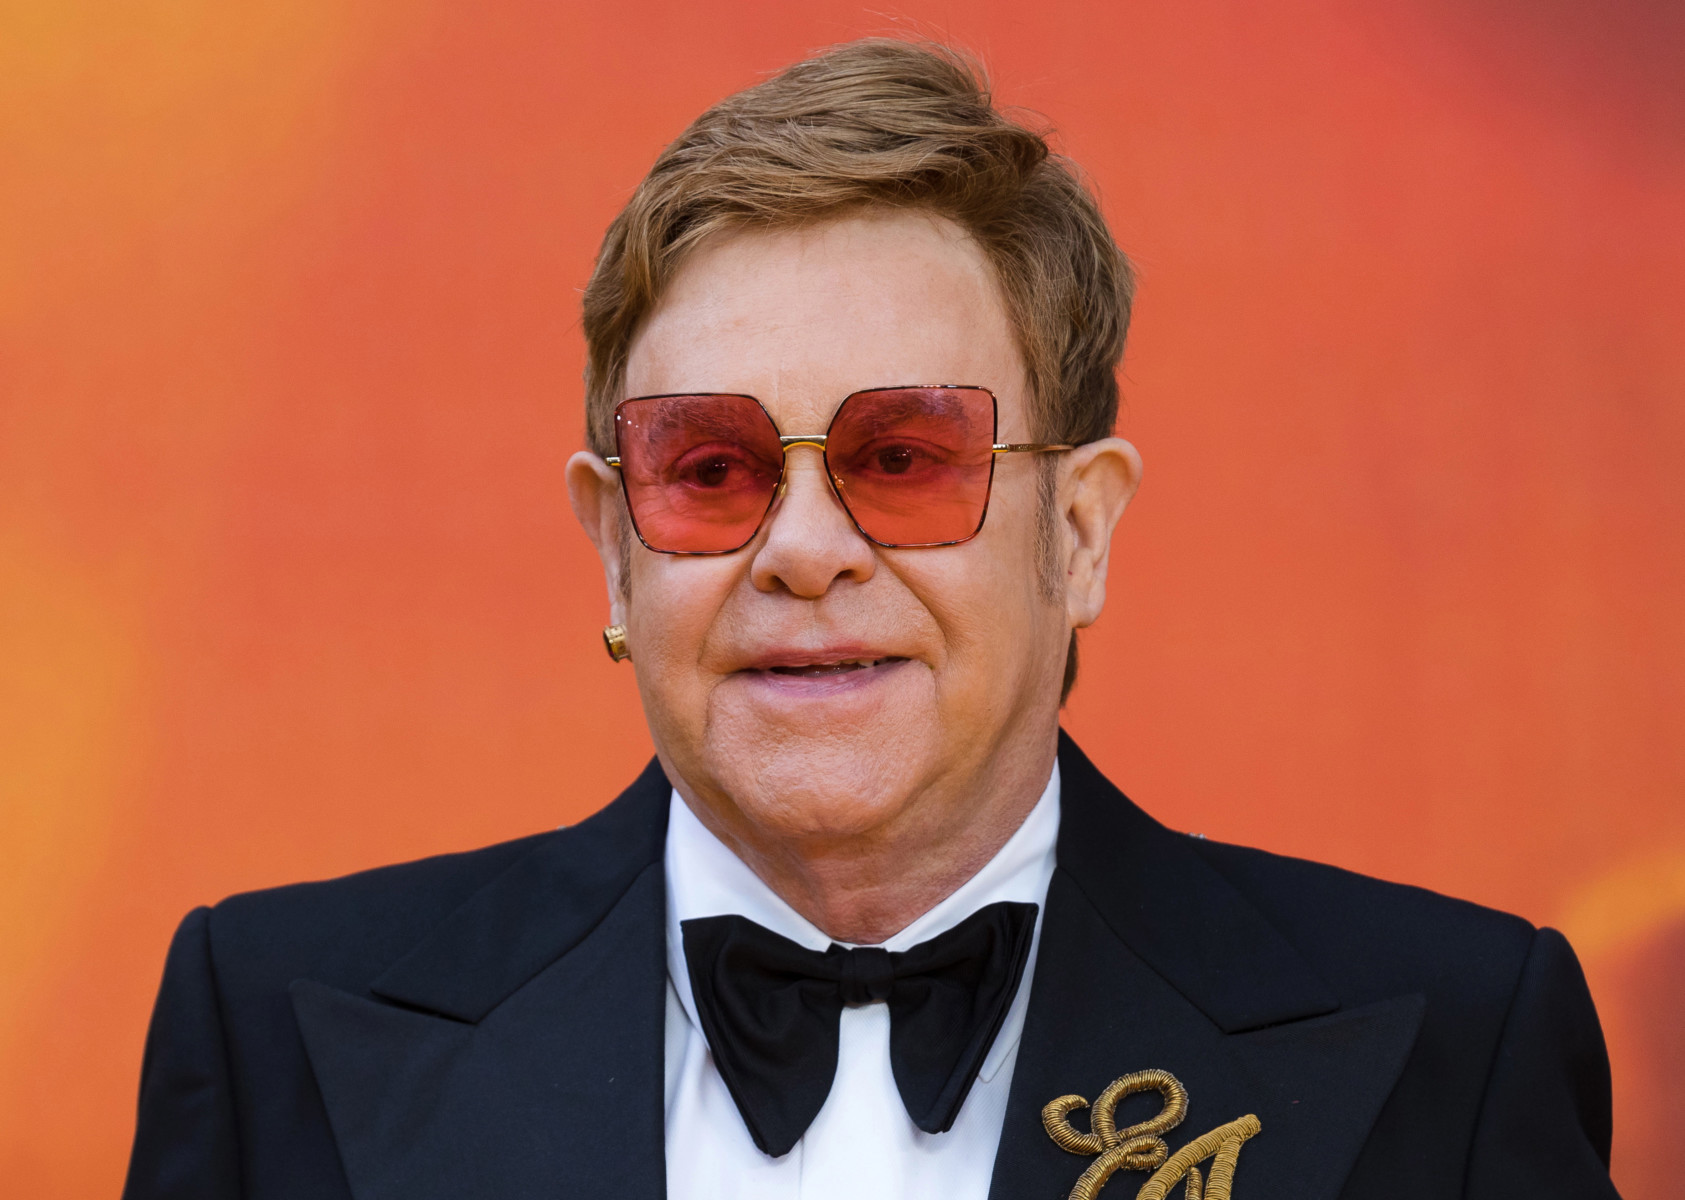 Elton John was tricked into thinking he was chatting to Putin about laws on gay rights in Russia